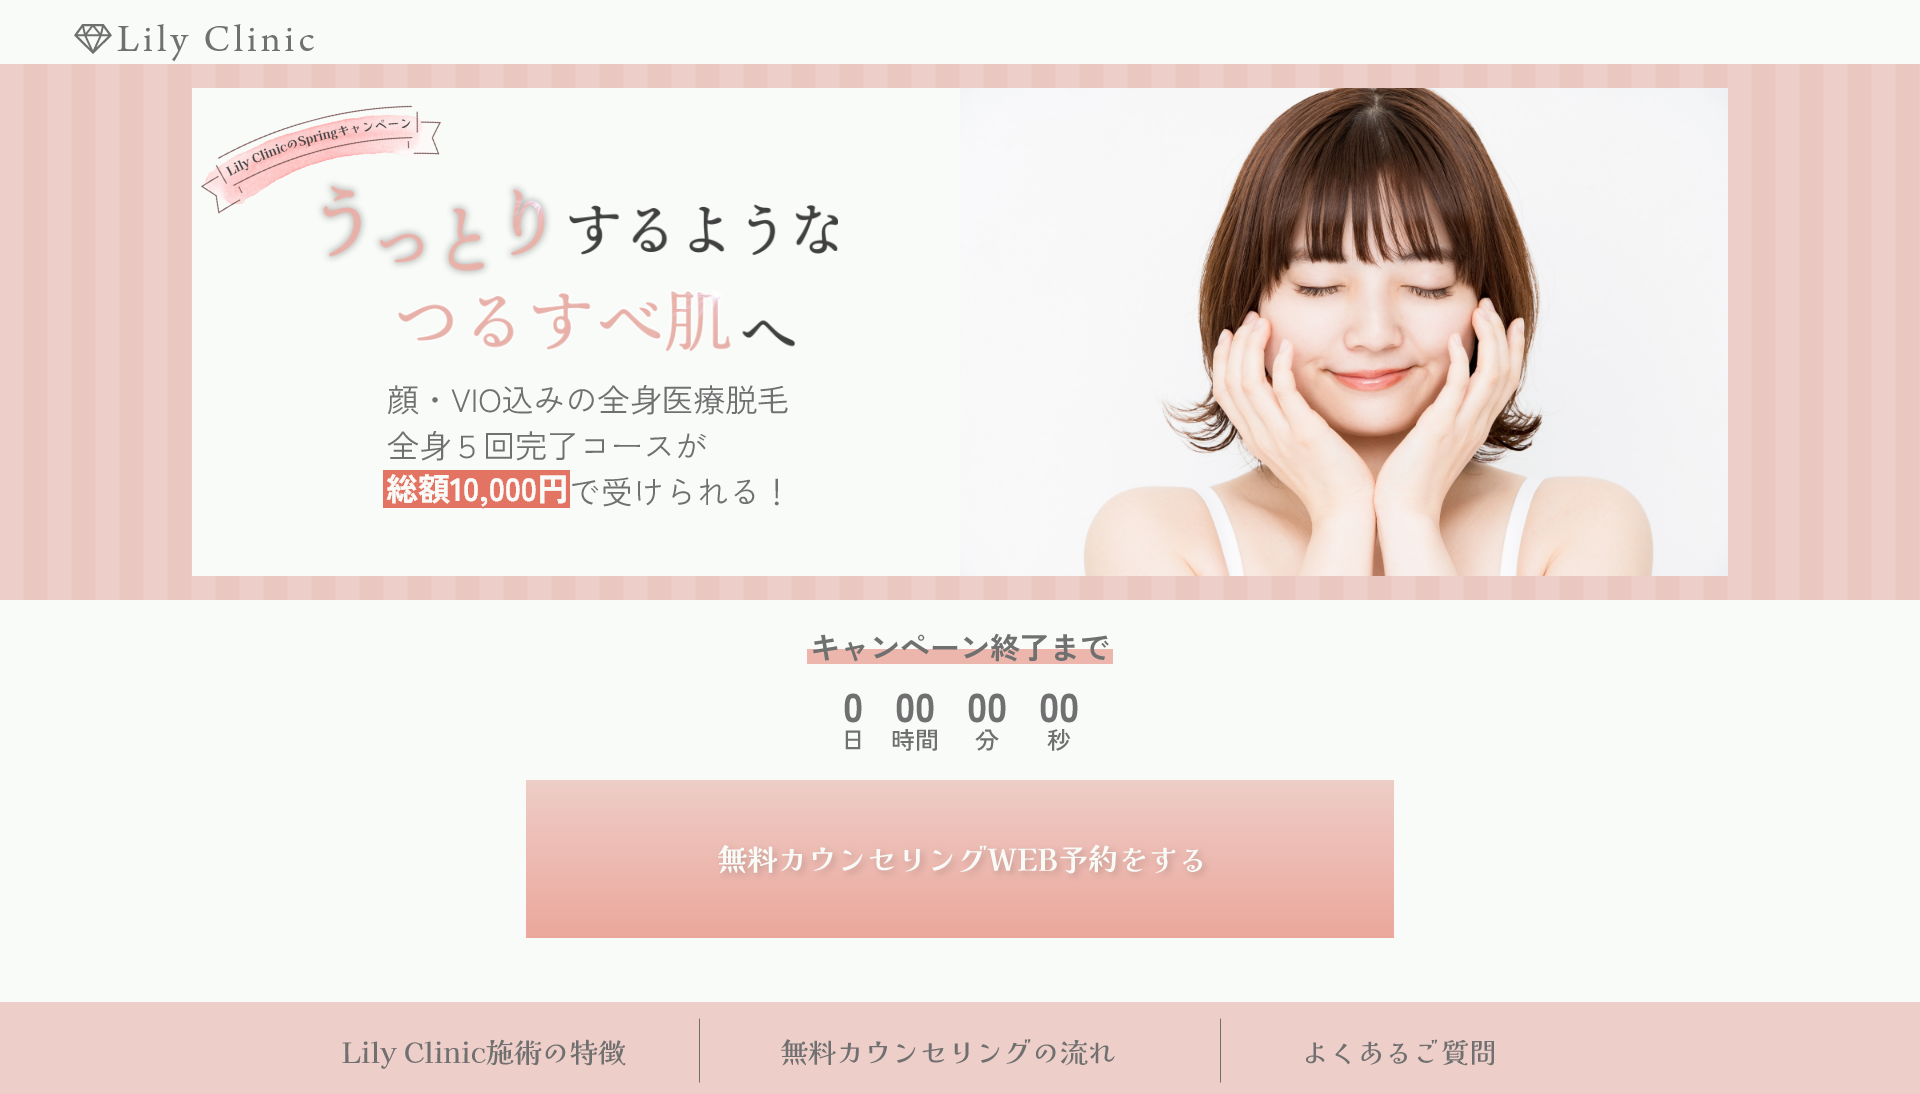 Lily Clinic 様のサムネイル